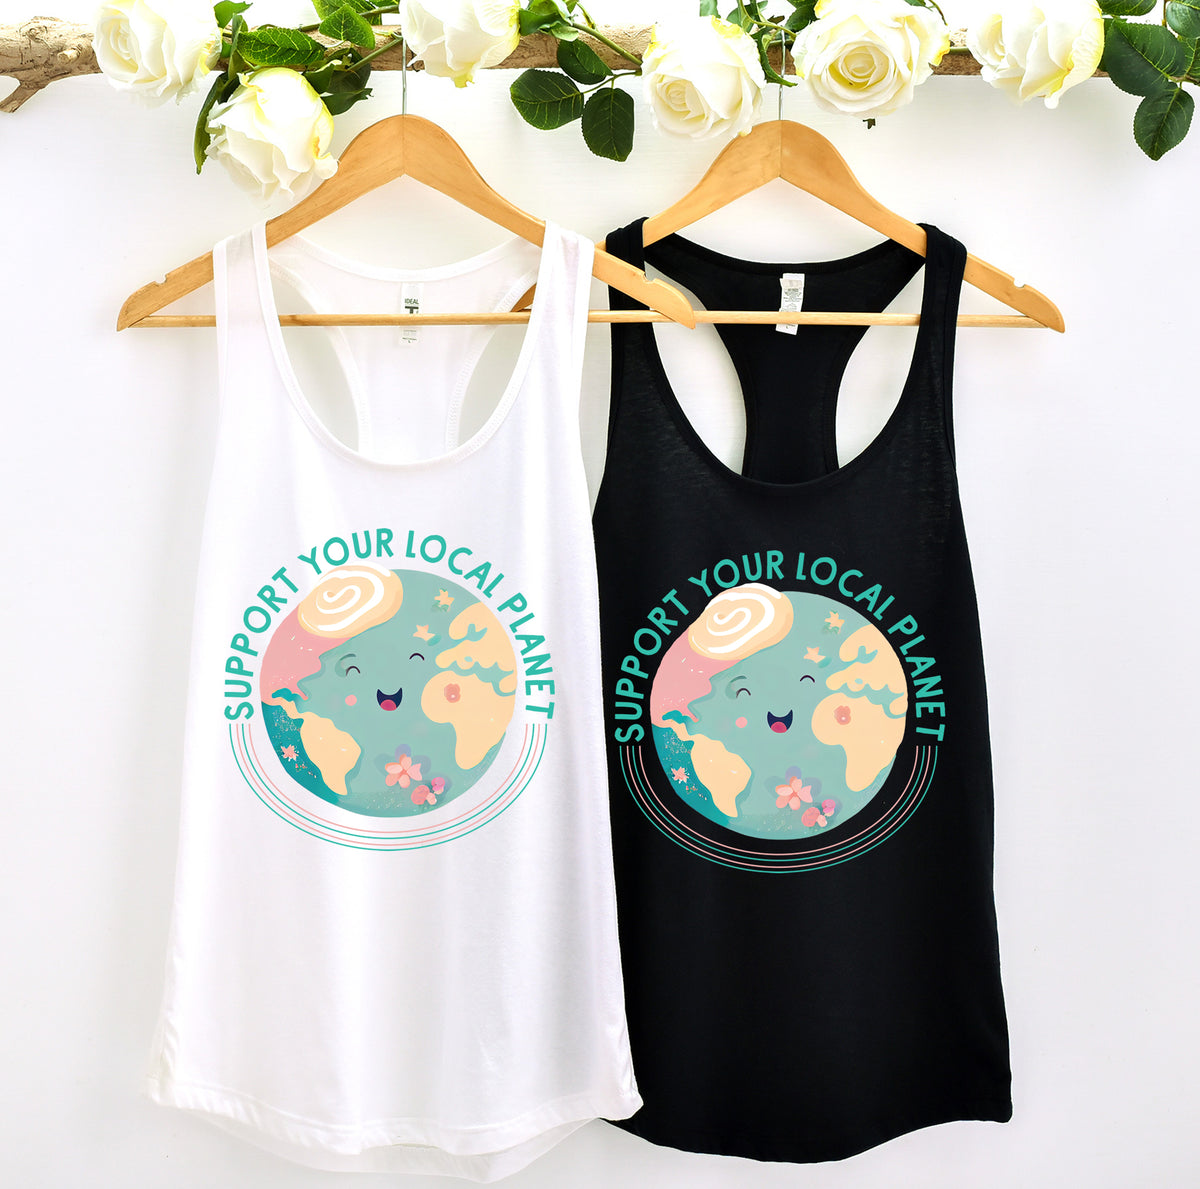 Support Your Local Planet Earth Day Shirt | Black White Racerback Tank Tops